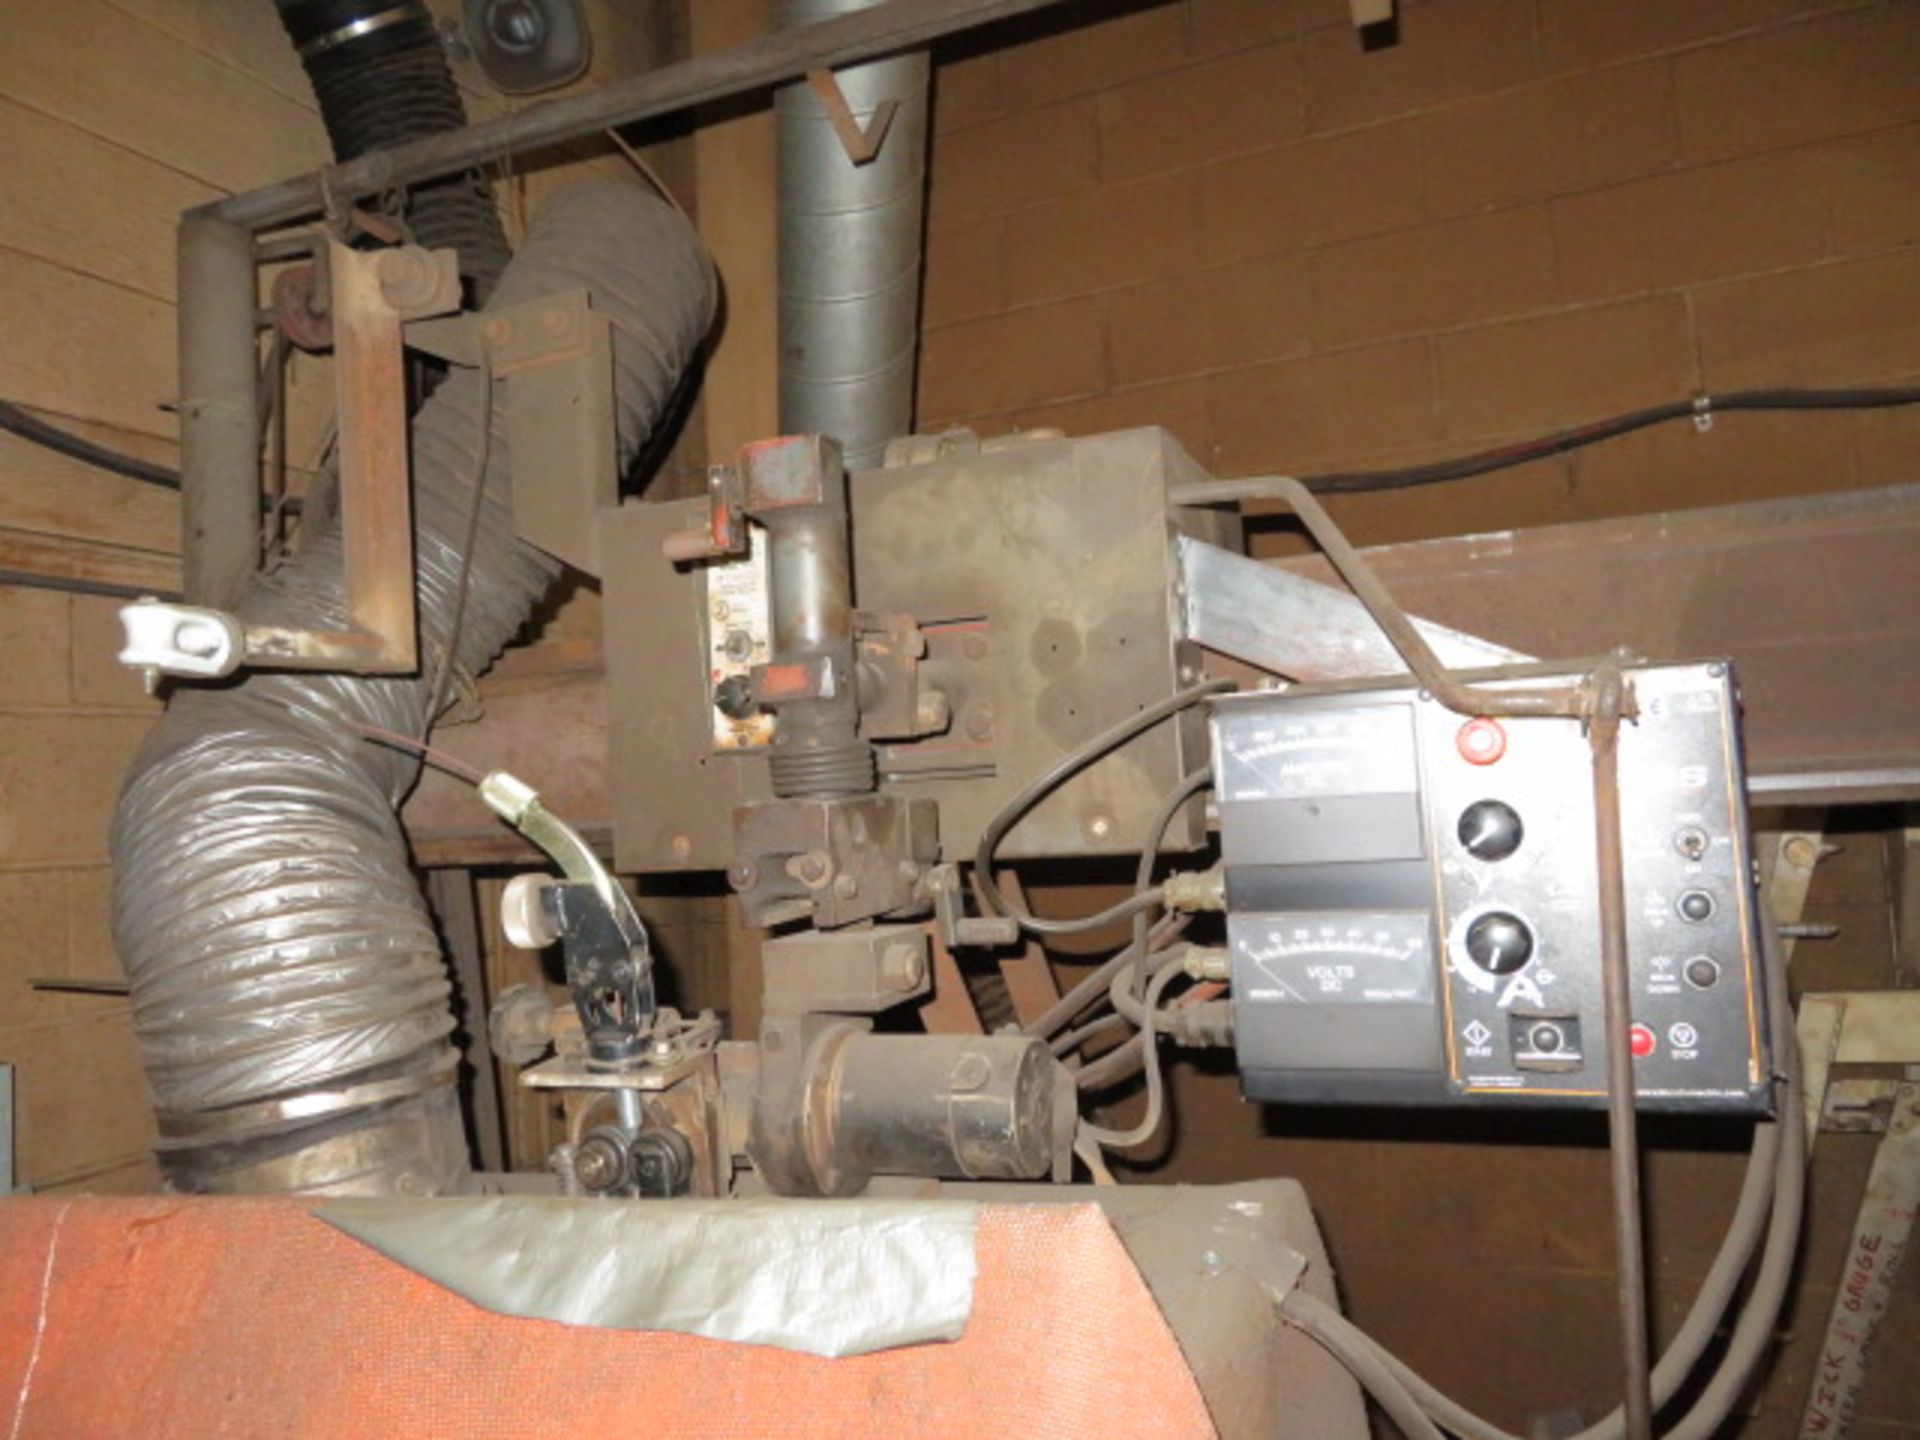 SUB-ARC WELDING UNIT W/VARIABLE SPEED ROTATING UNIT, MOBILE GANTRY FRAME, LINCOLN NA-3N AUTO WIRE - Image 6 of 6